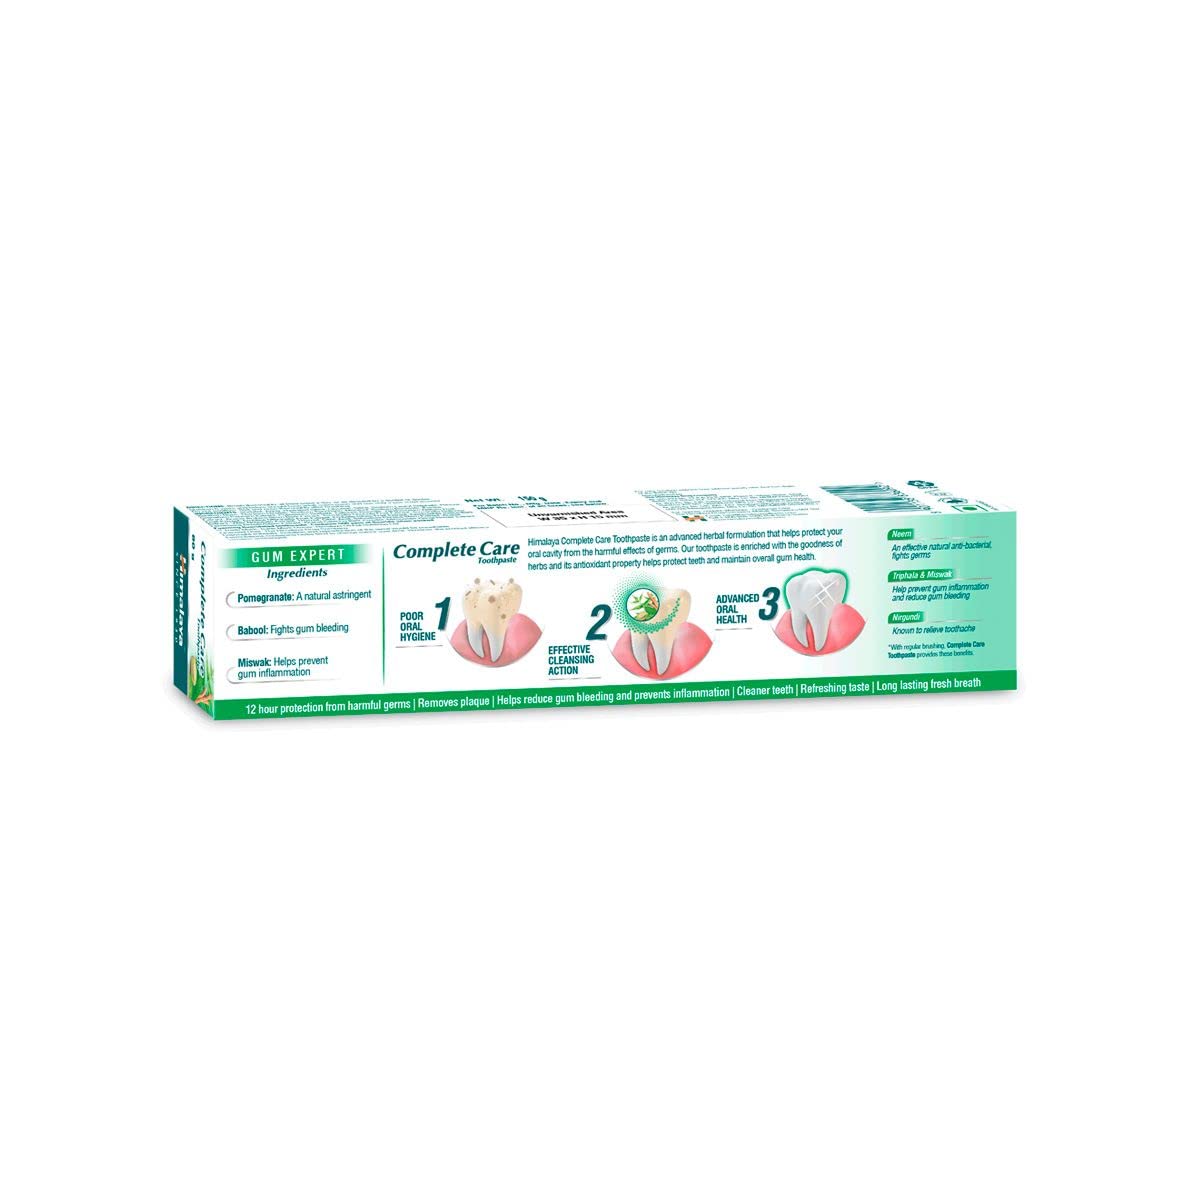 Himalaya Herbals Complete Care Toothpaste ,150 g - Pack of 2